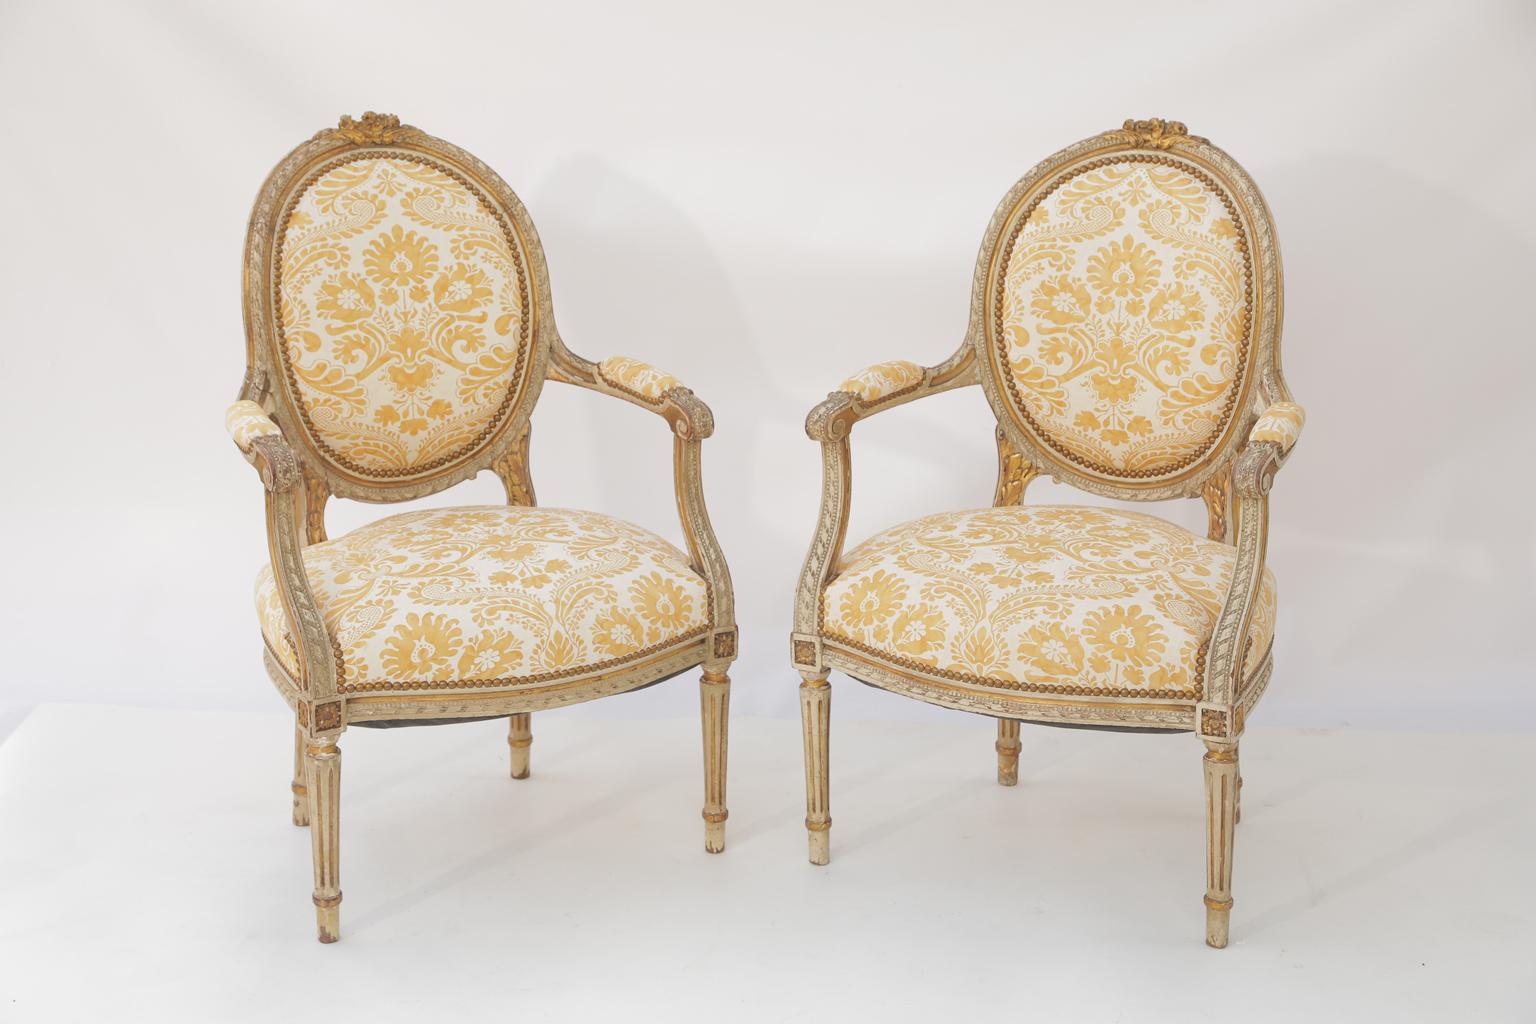 Pair of fauteuils in the Louis XVI style, having a painted and parcel-gilt finish showing natural wear, each oval padded backrest in a gadrooned frame, surmounted by foliate carving, outswept arms, with elbow rests, ending in scrolls, set on curved